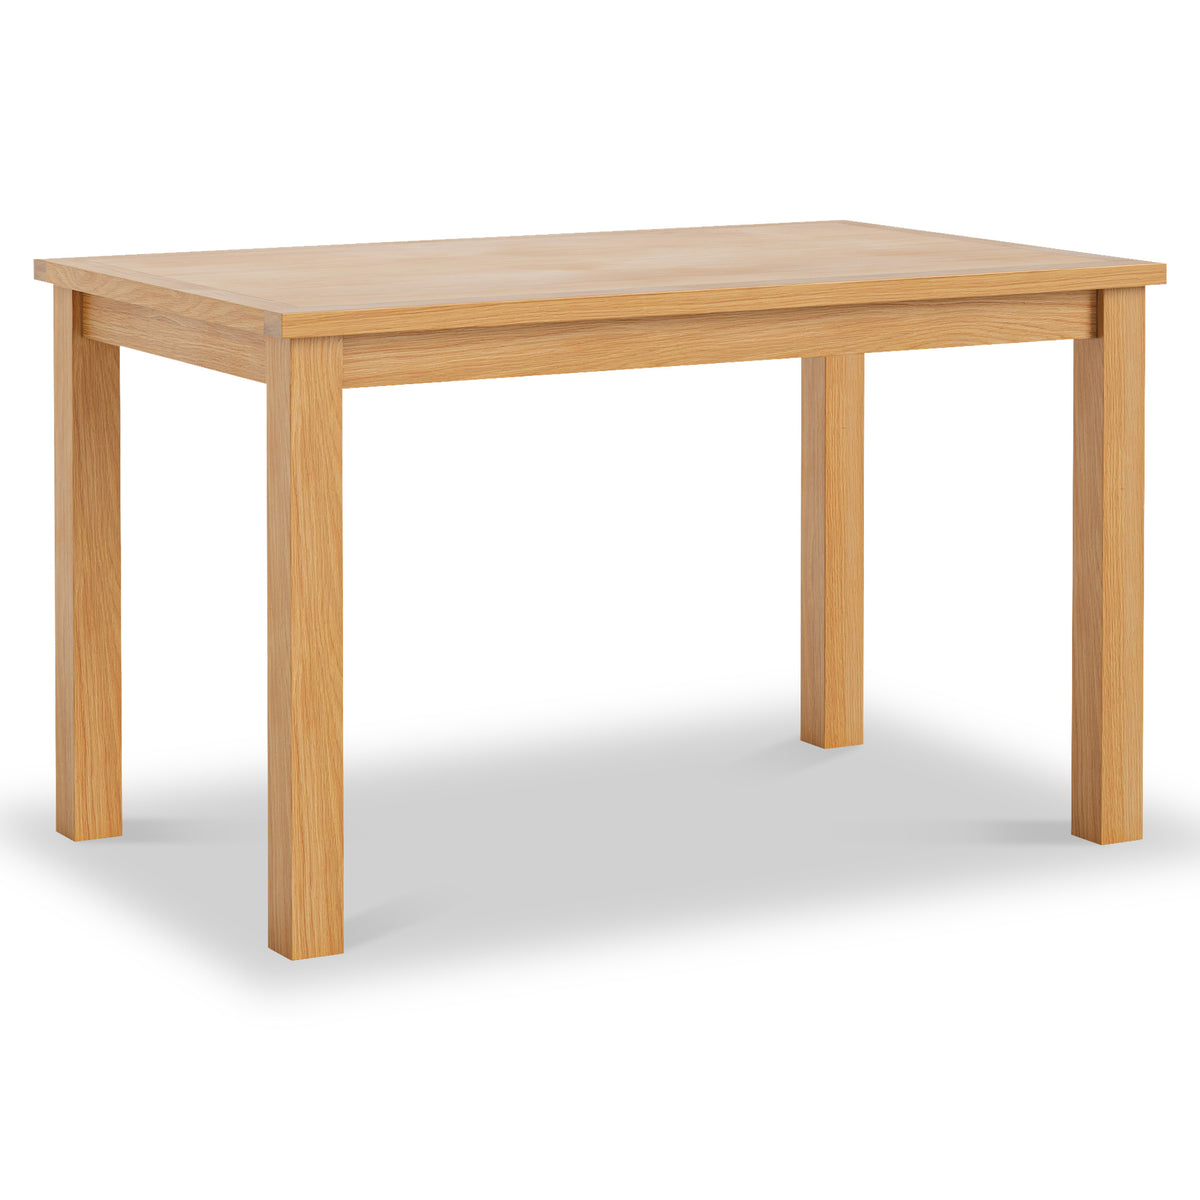 London Oak 130cm Fixed Dining Table from Roseland Furniture